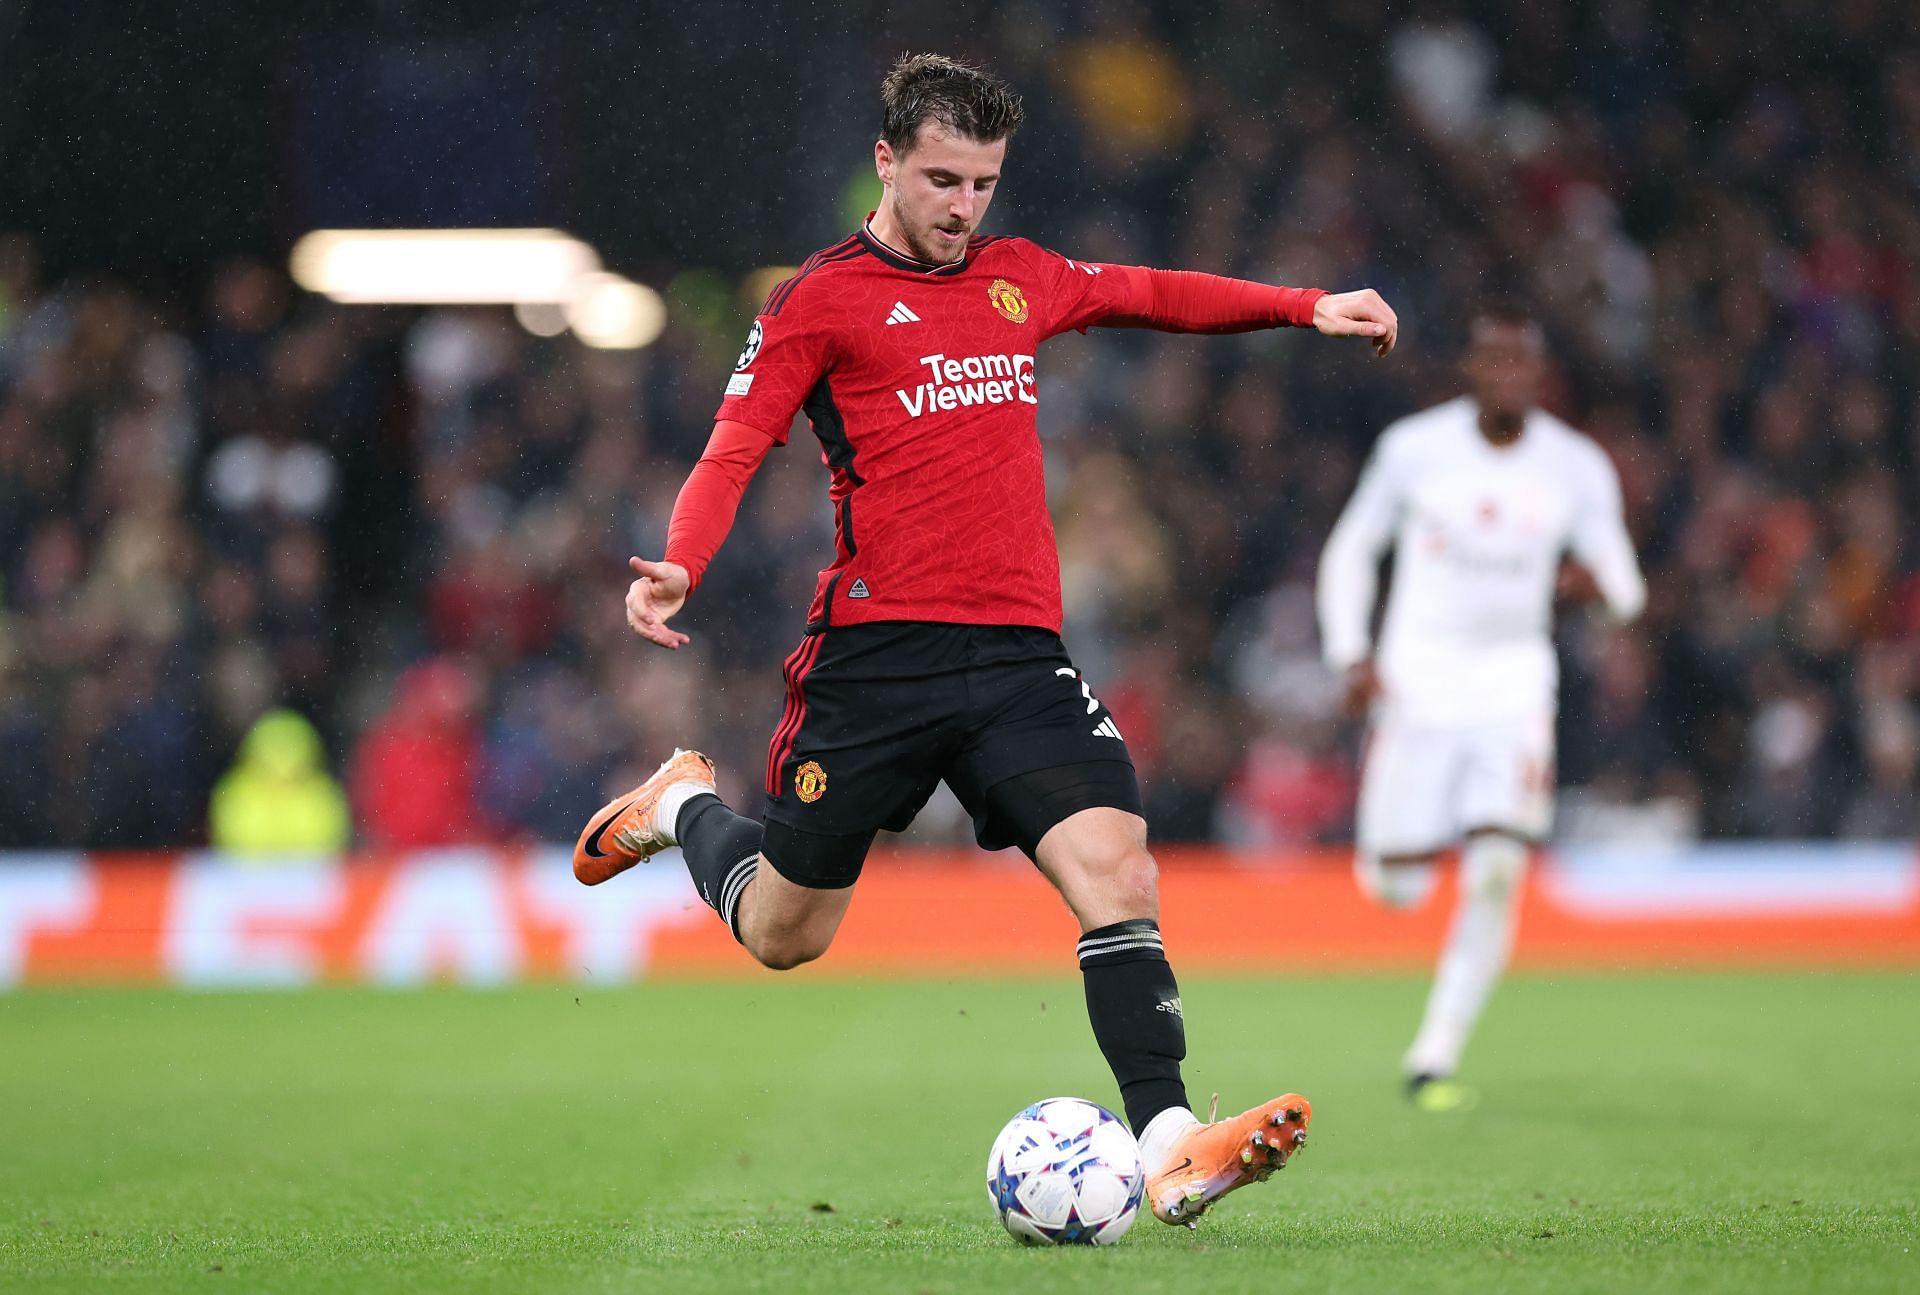 Mason Mount has struggled to live up to expectations at Old Trafford.